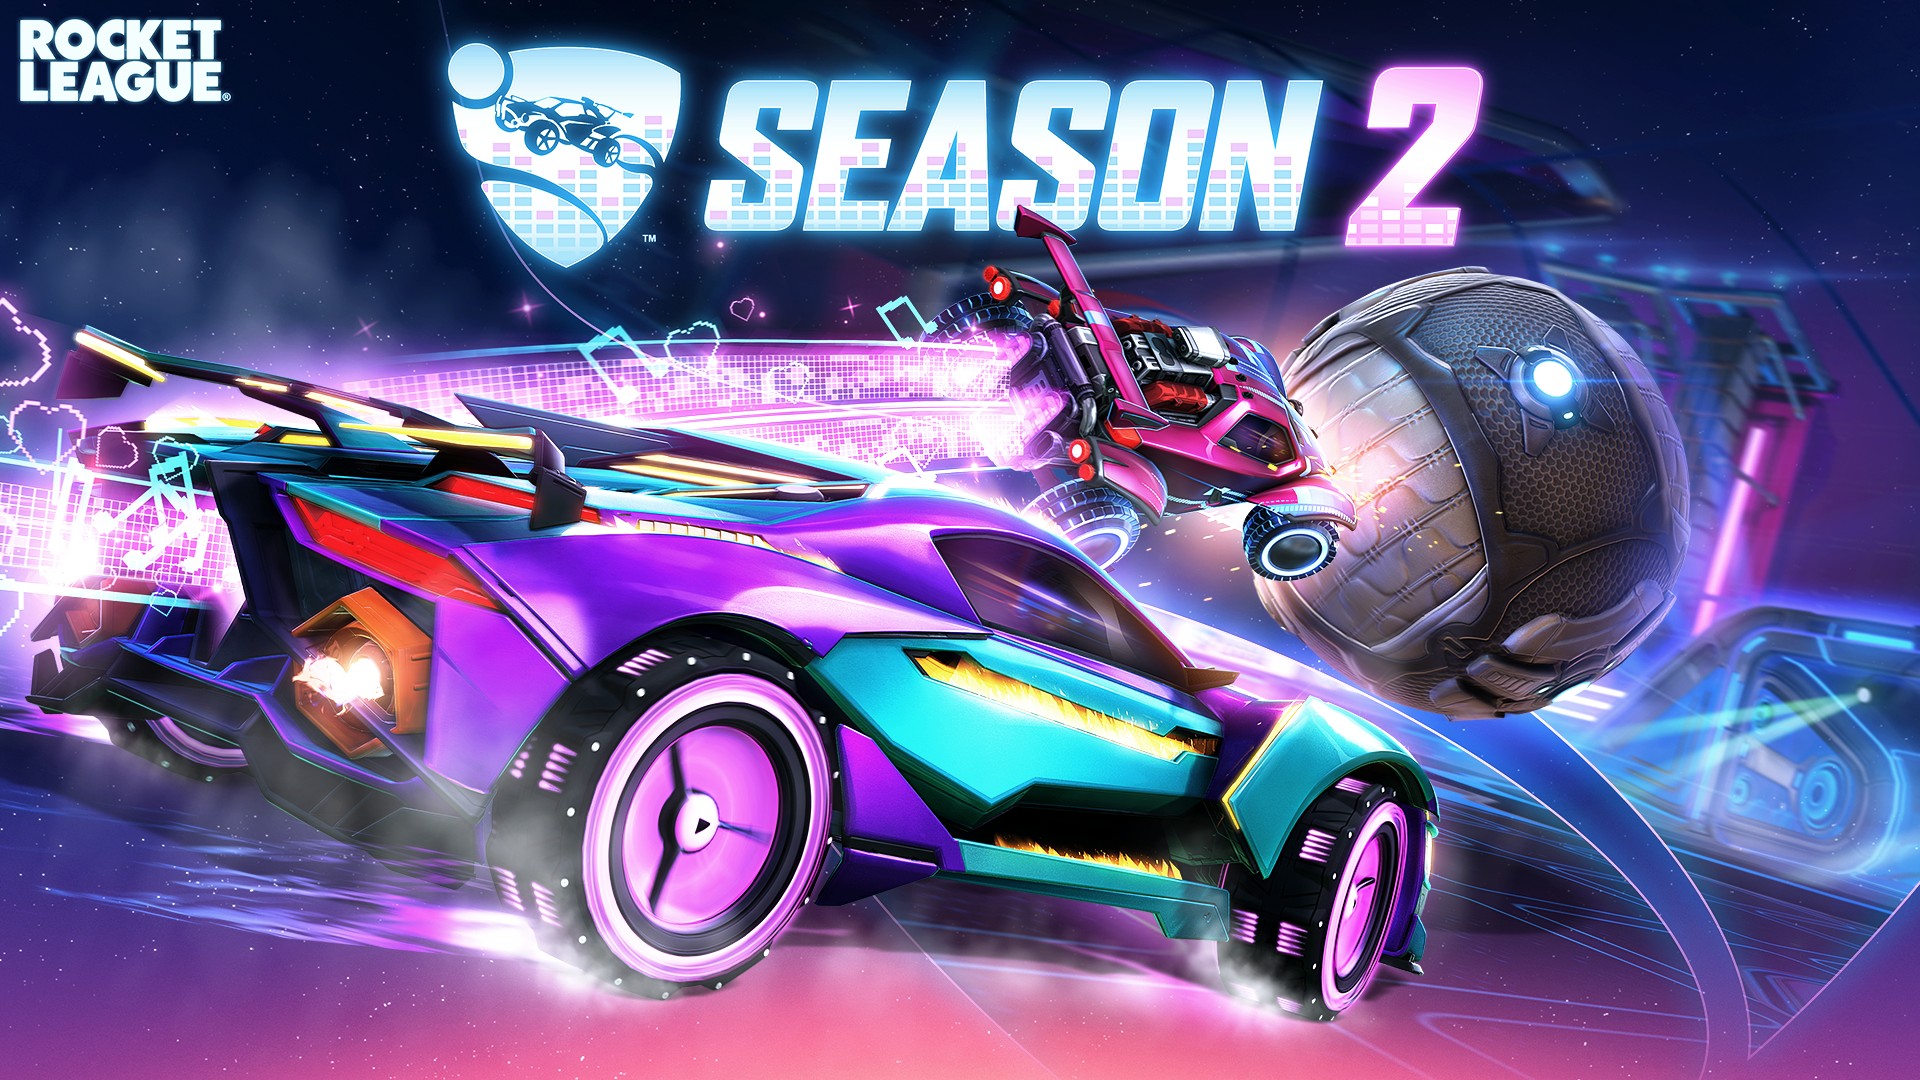 Video For Season 2 Drops December 9 in Rocket League with Xbox Series X|S Optimizations